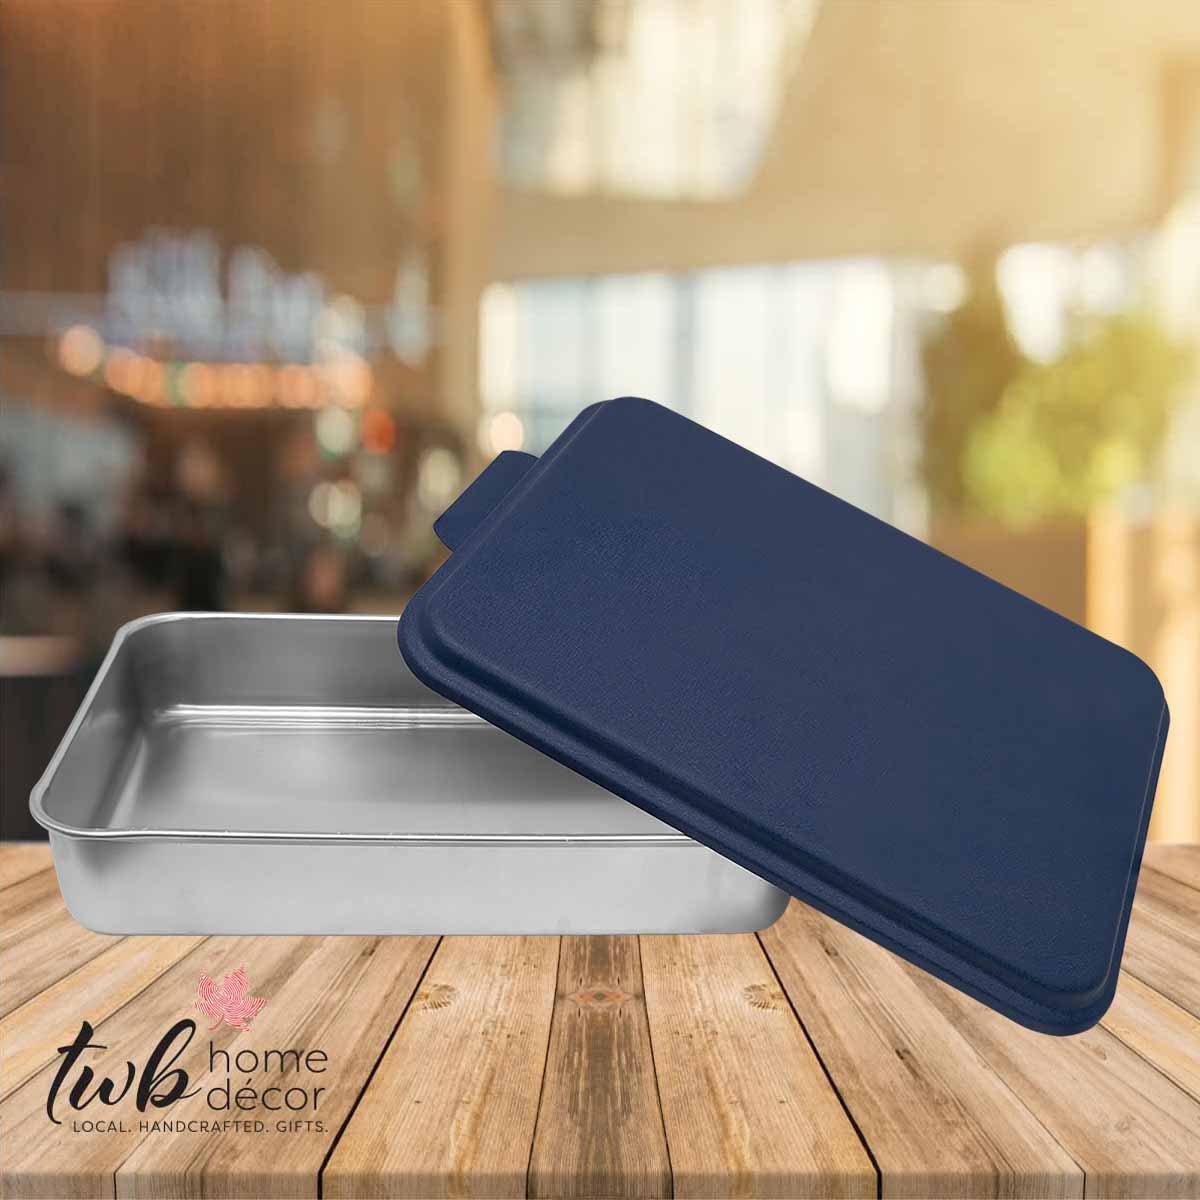 The ...'s Kitchen Cake Pan with lid - CUSTOM - TWB Home Decor